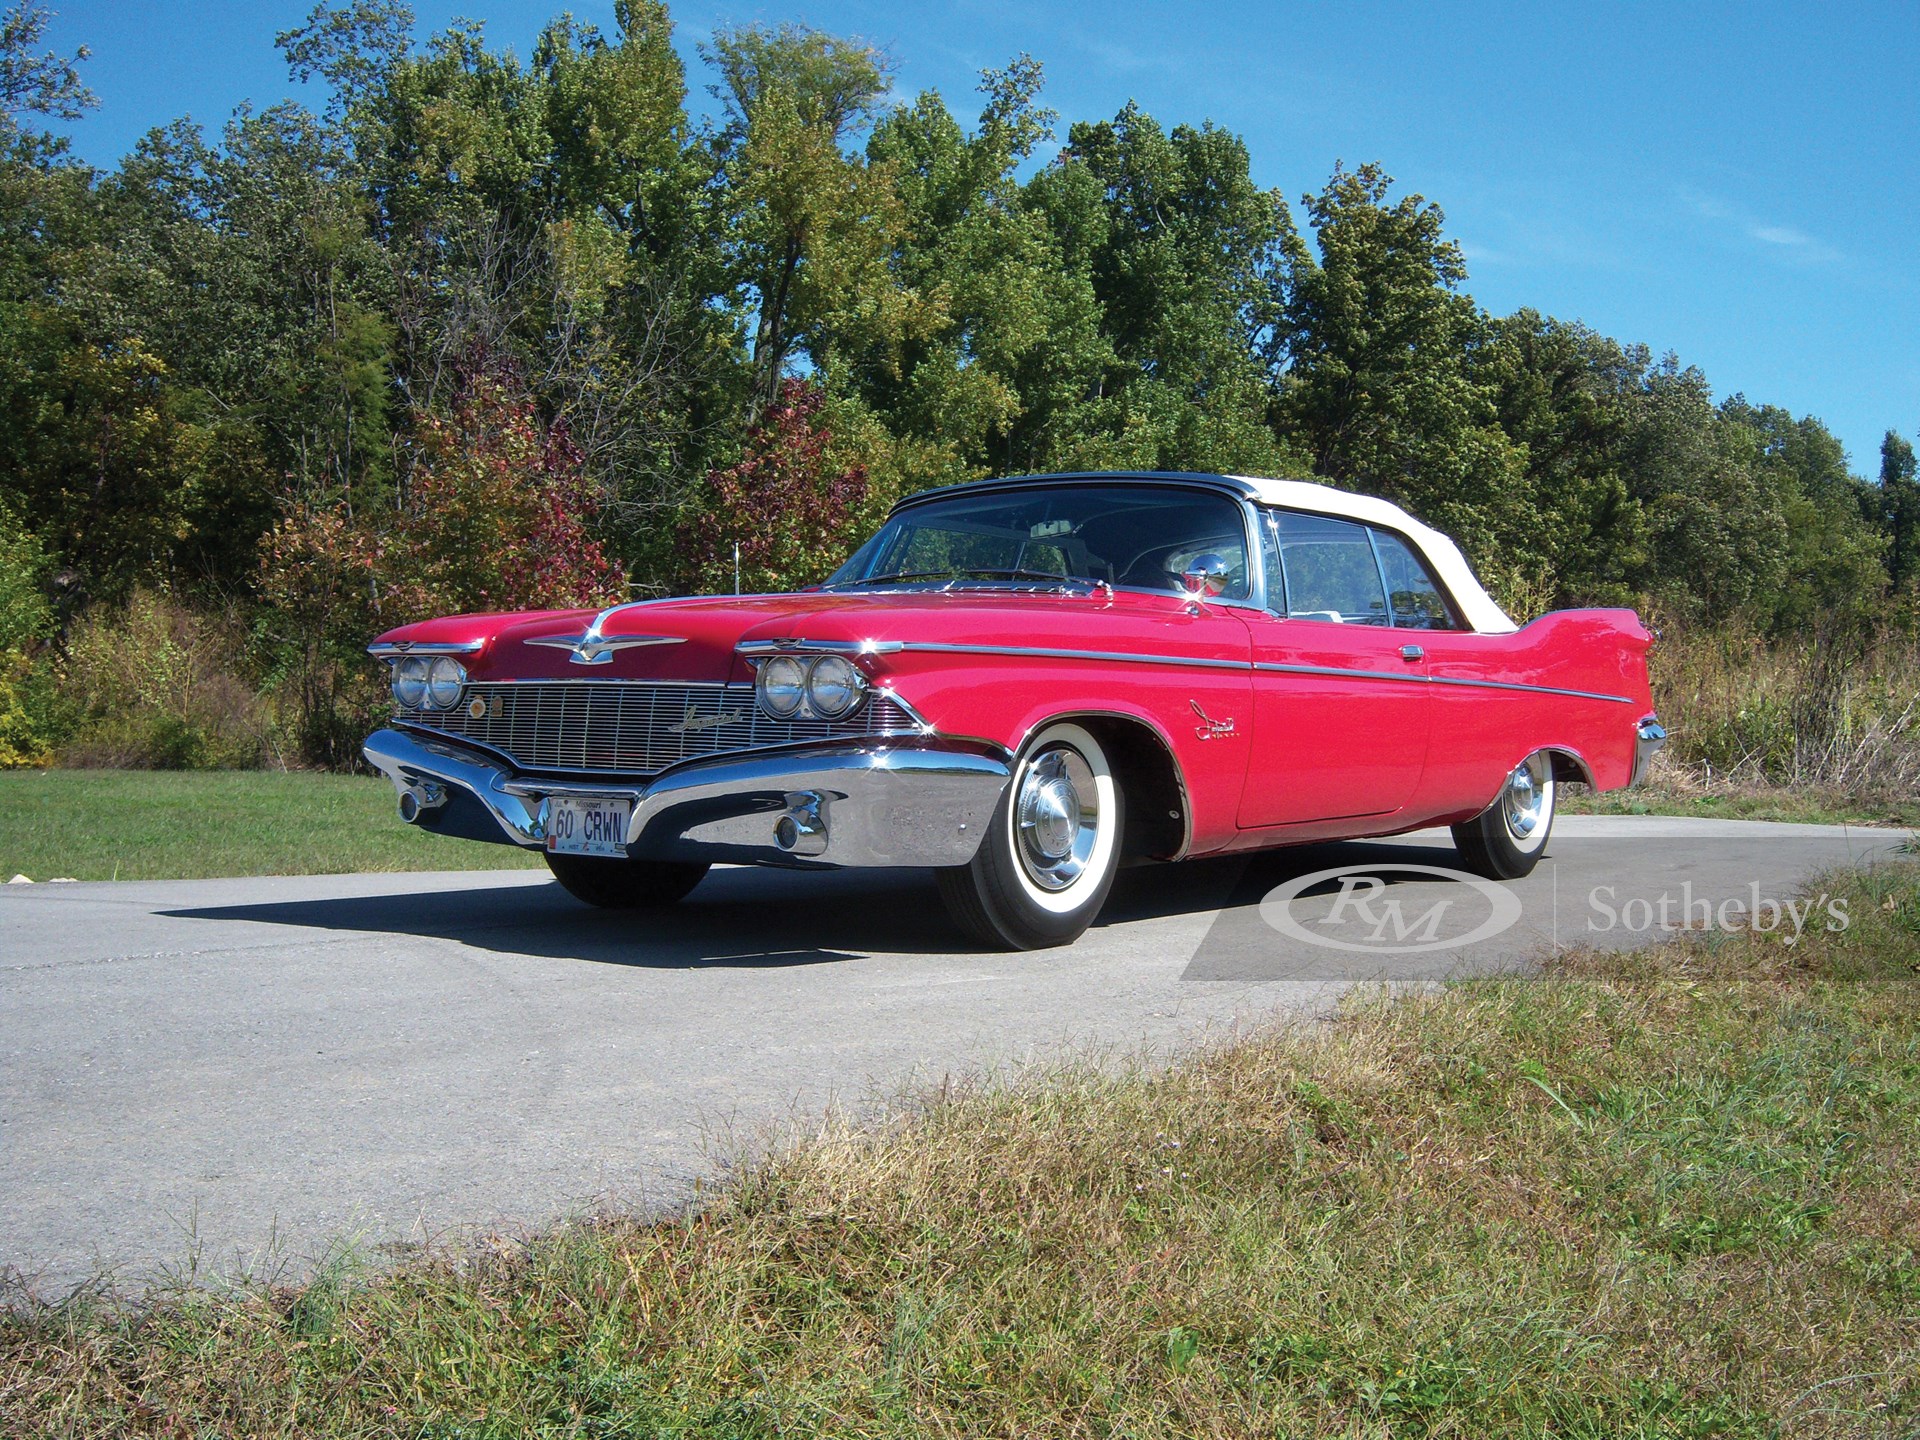 1960 Imperial Crown Convertible 